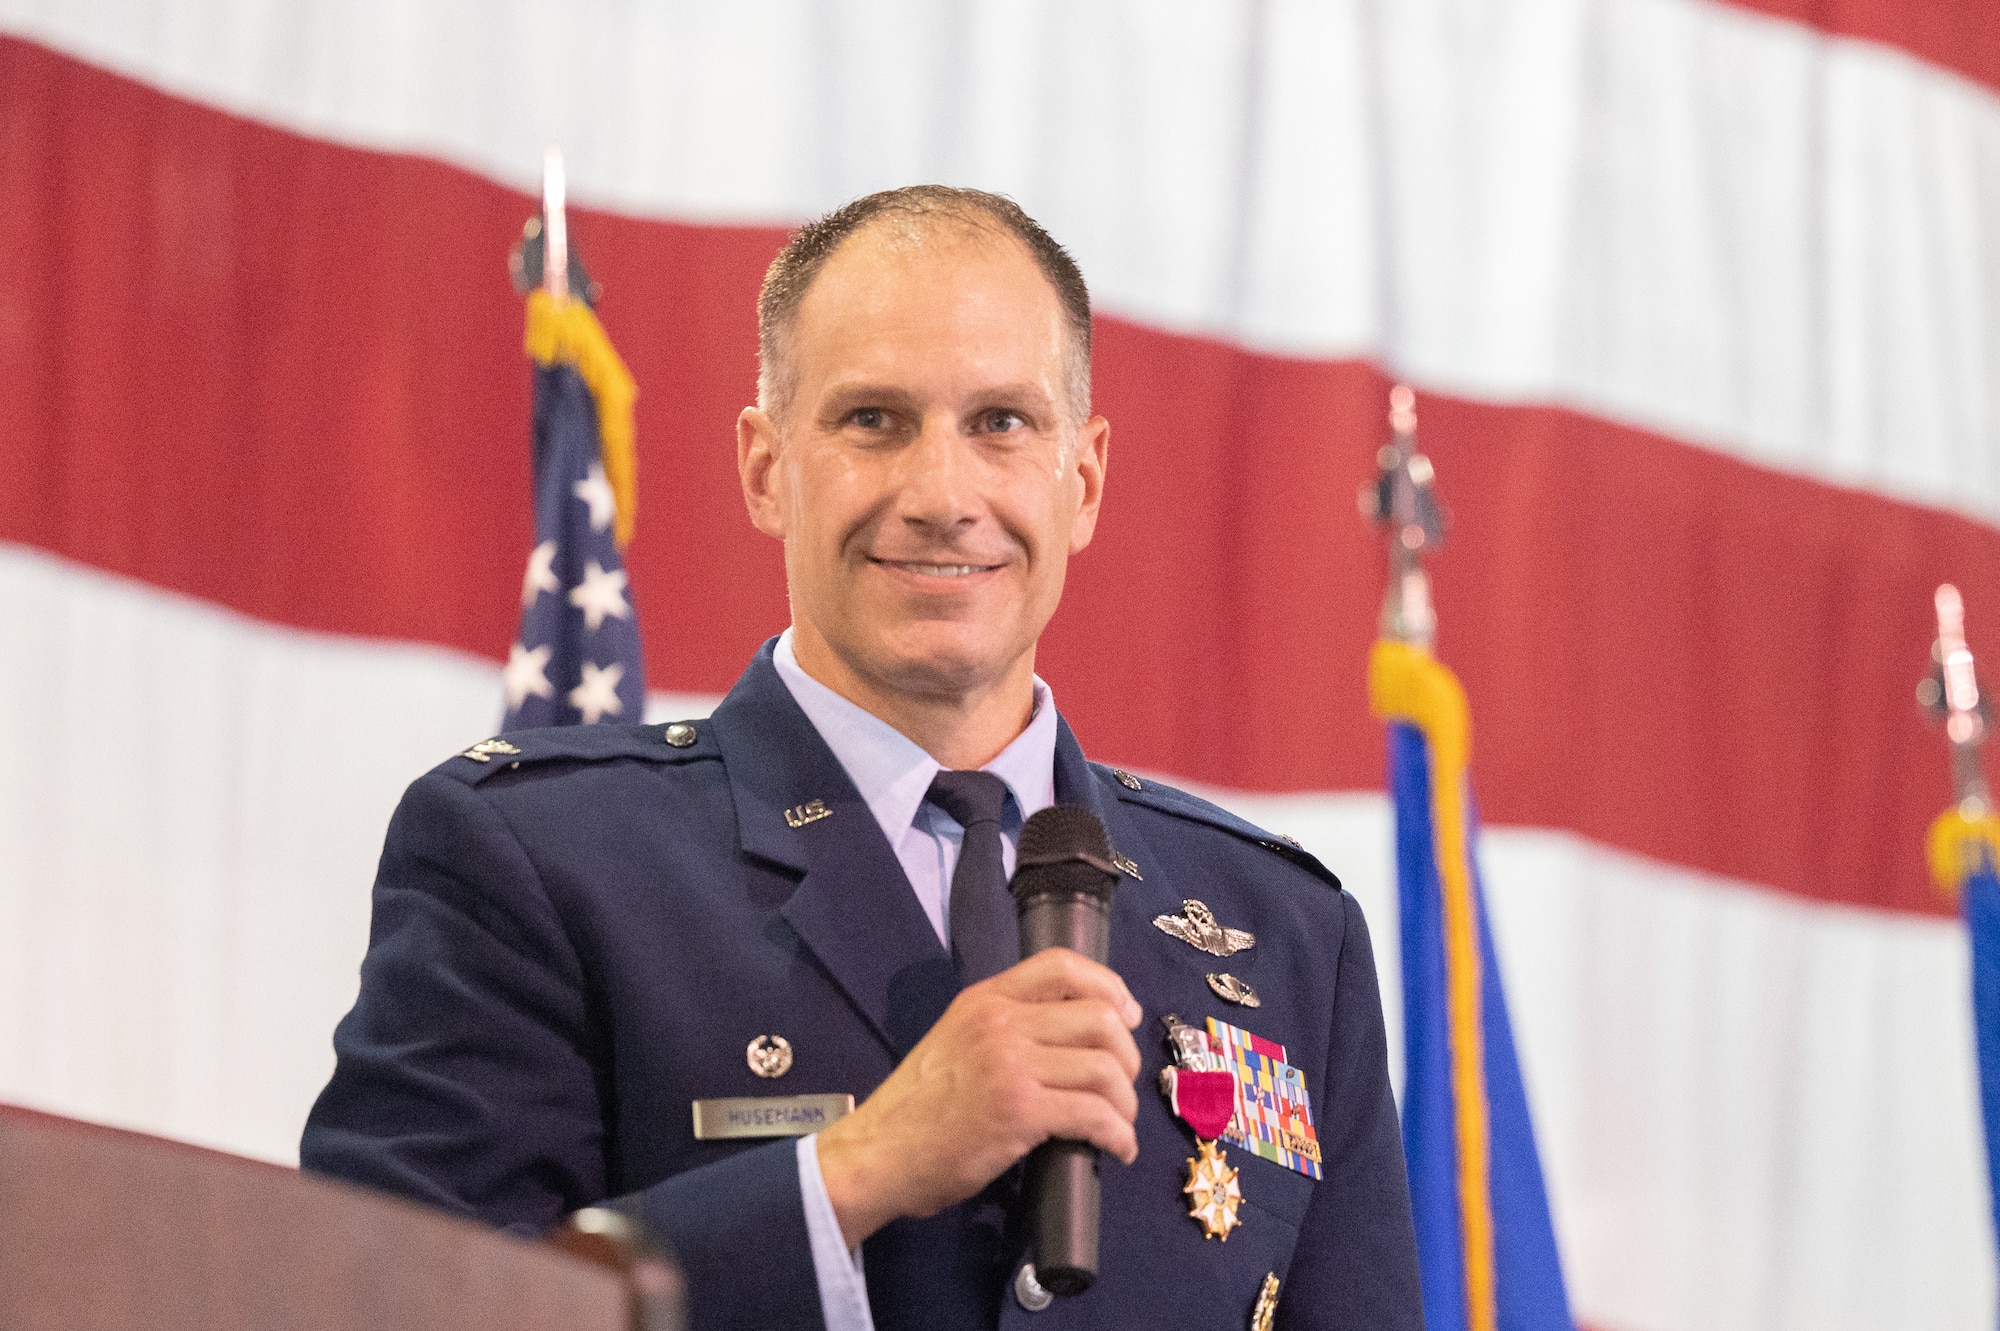 Col. Matthew S. Husemann, 436th Airlift Wing commander, gives his final farewell before relinquishing command during the 436th AW Change of Command ceremony at Dover Air Force Base, Delaware, July 7, 2023. Husemann relinquished command to Col. William C. McDonald in a ceremony attended by family, friends, distinguished visitors, local civic leaders and members of Team Dover. (U.S. Air Force photo by Mauricio Campino)